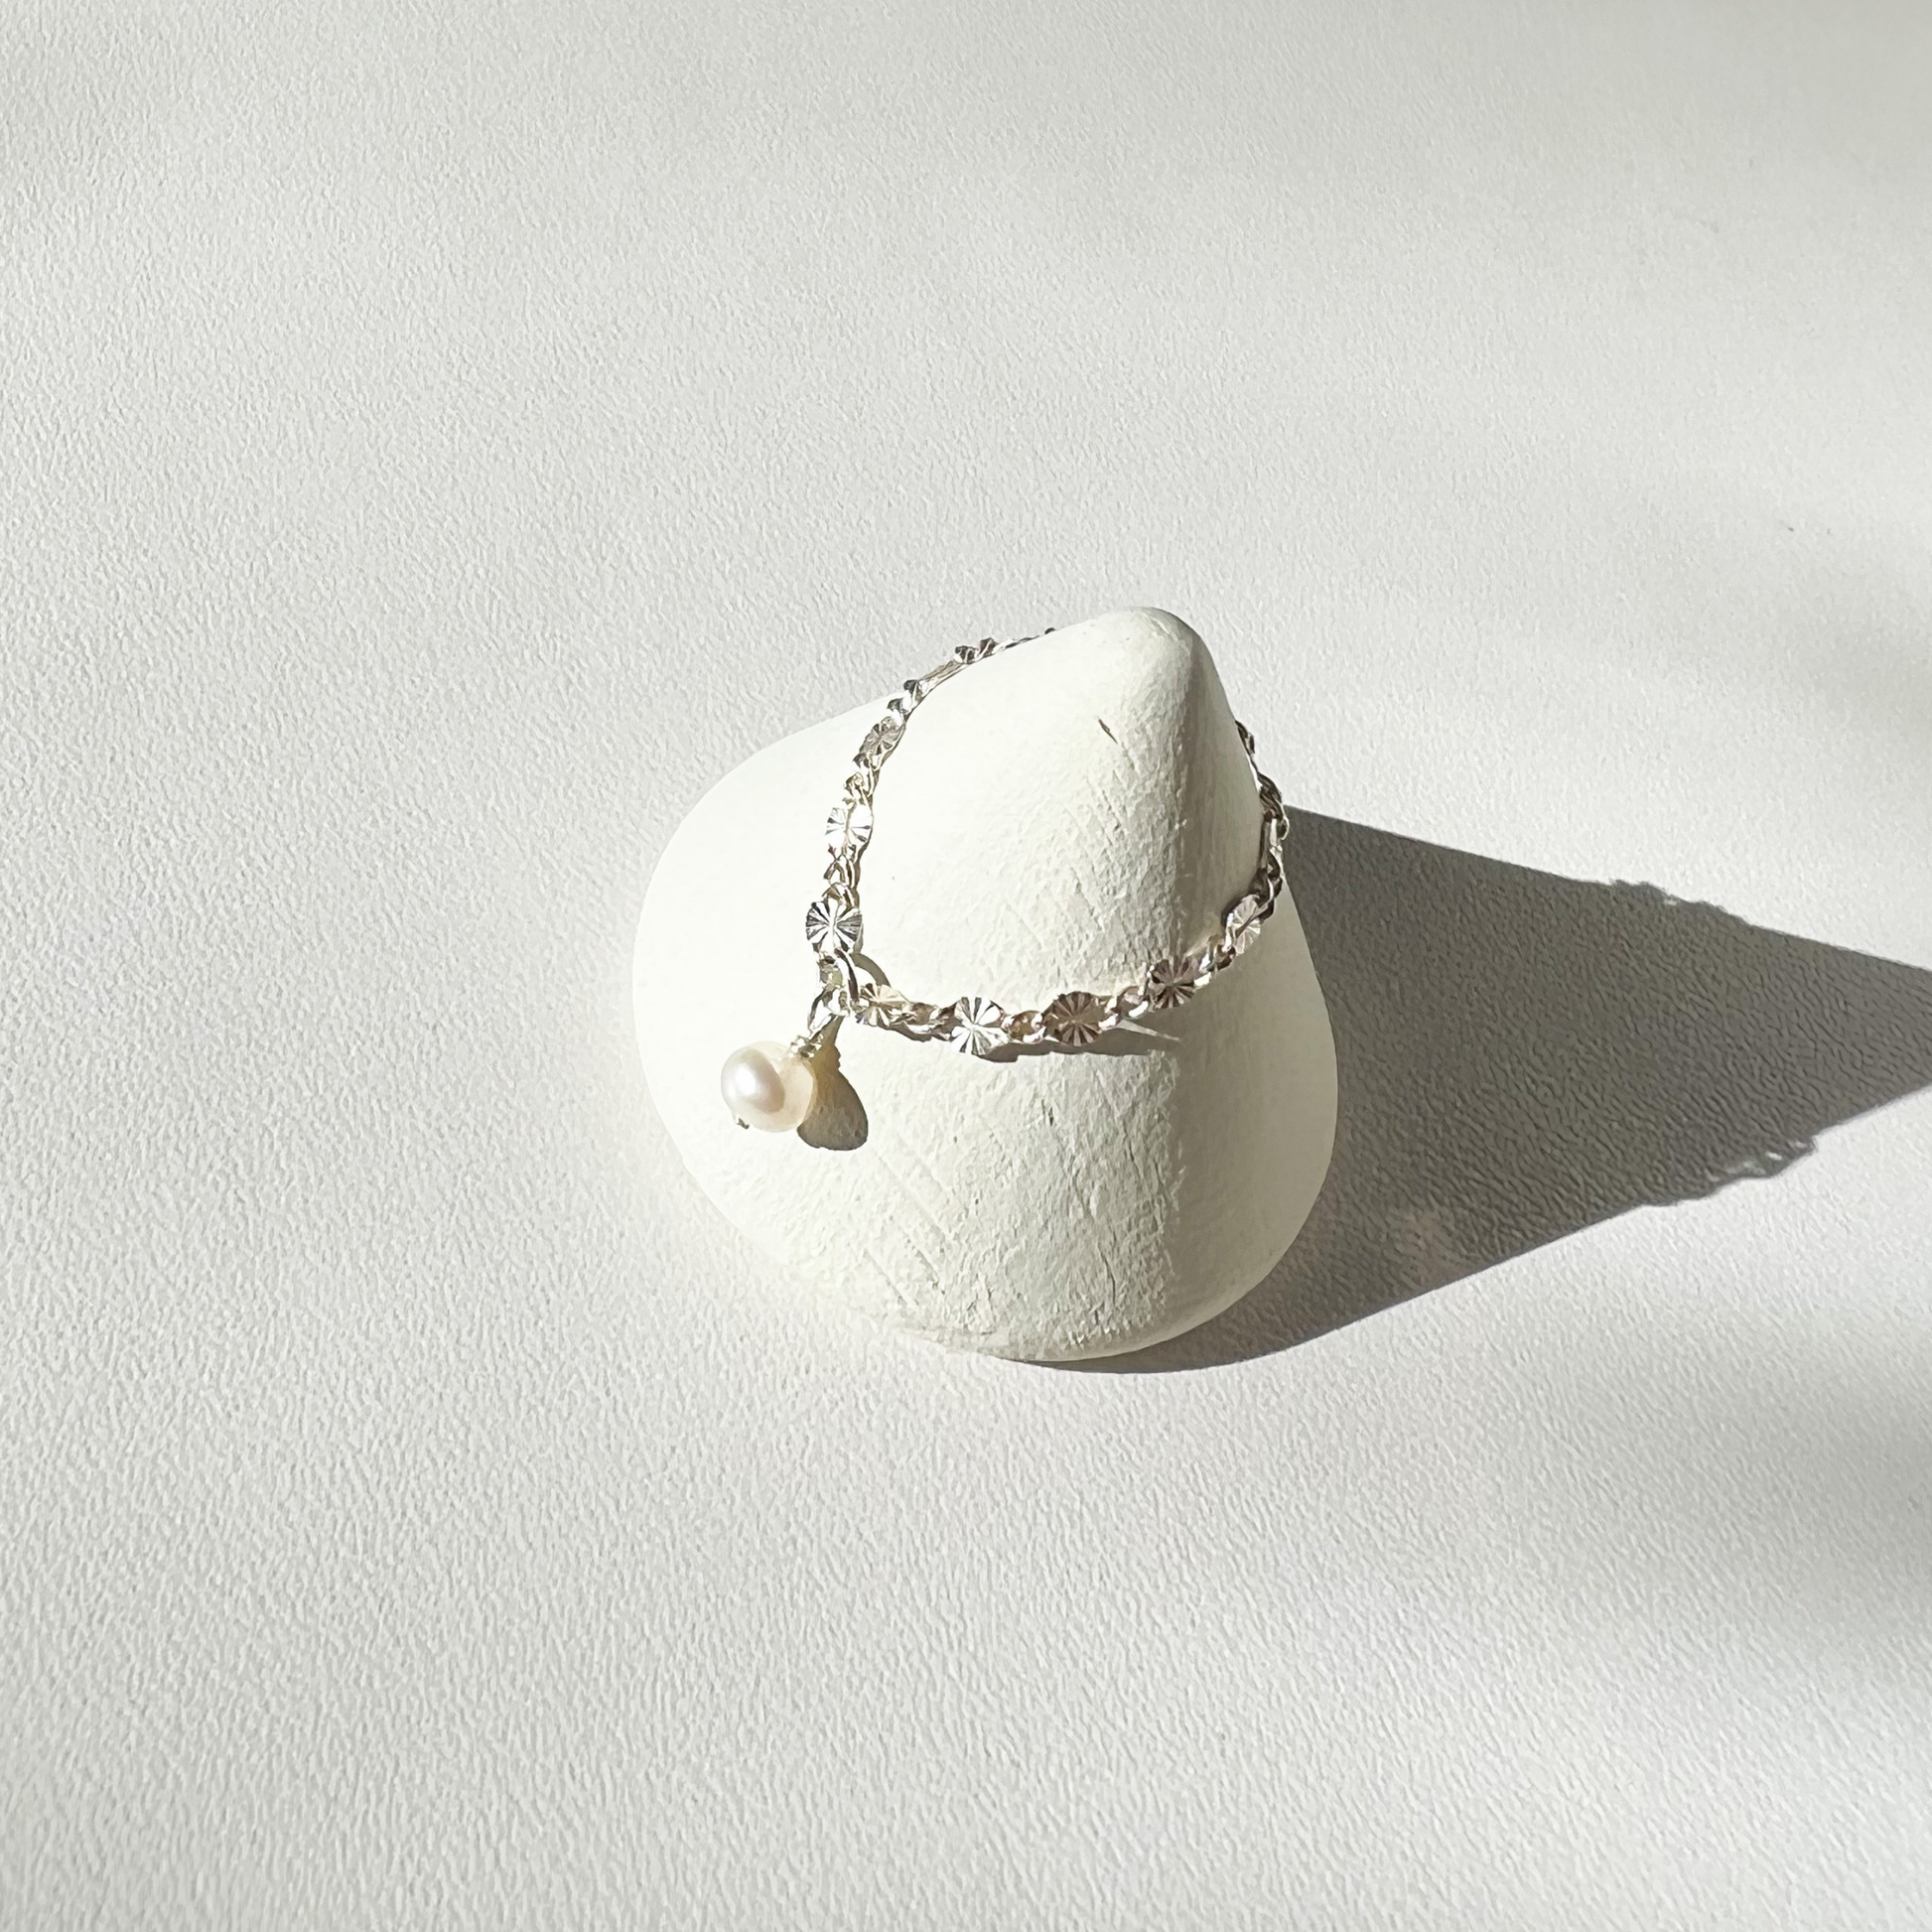 Roop Jewelry .925 sterling silver chain ring with pearl bead. 